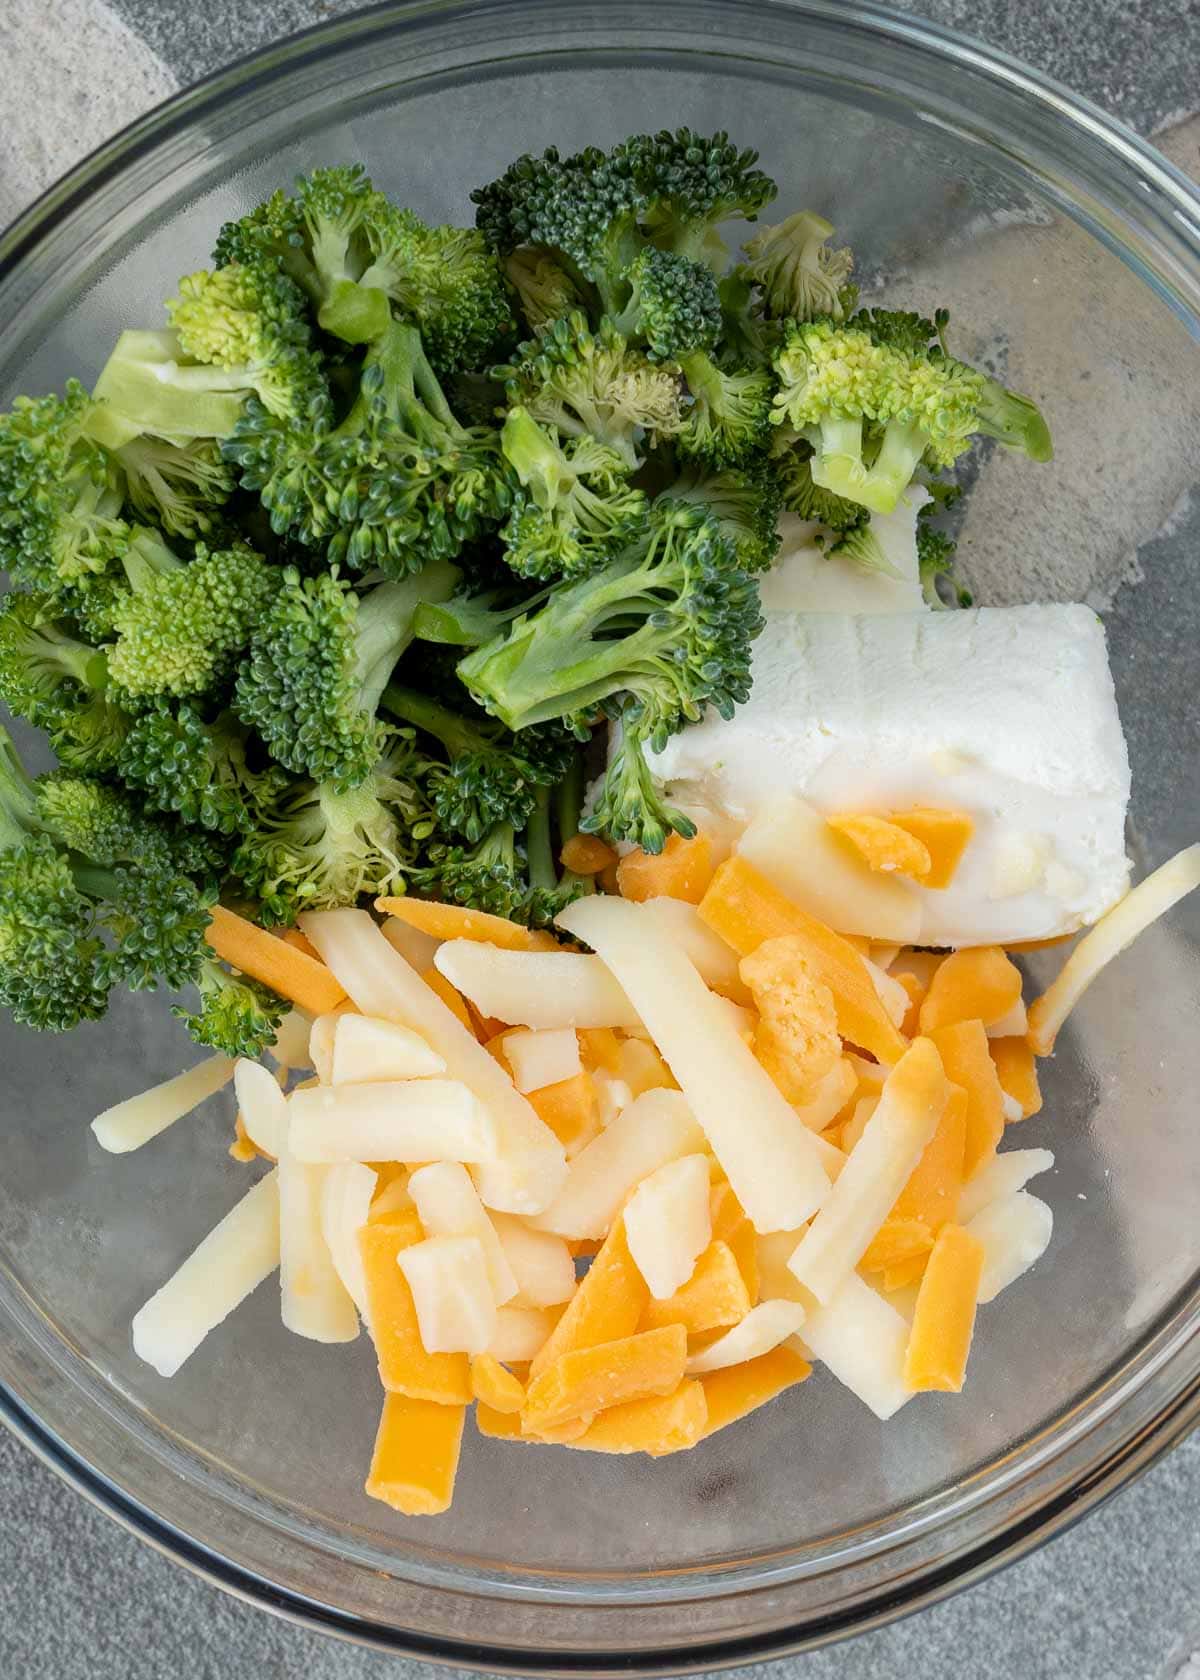 shredded cheese, softened cream cheese, and broccoli florets in a glass bowl